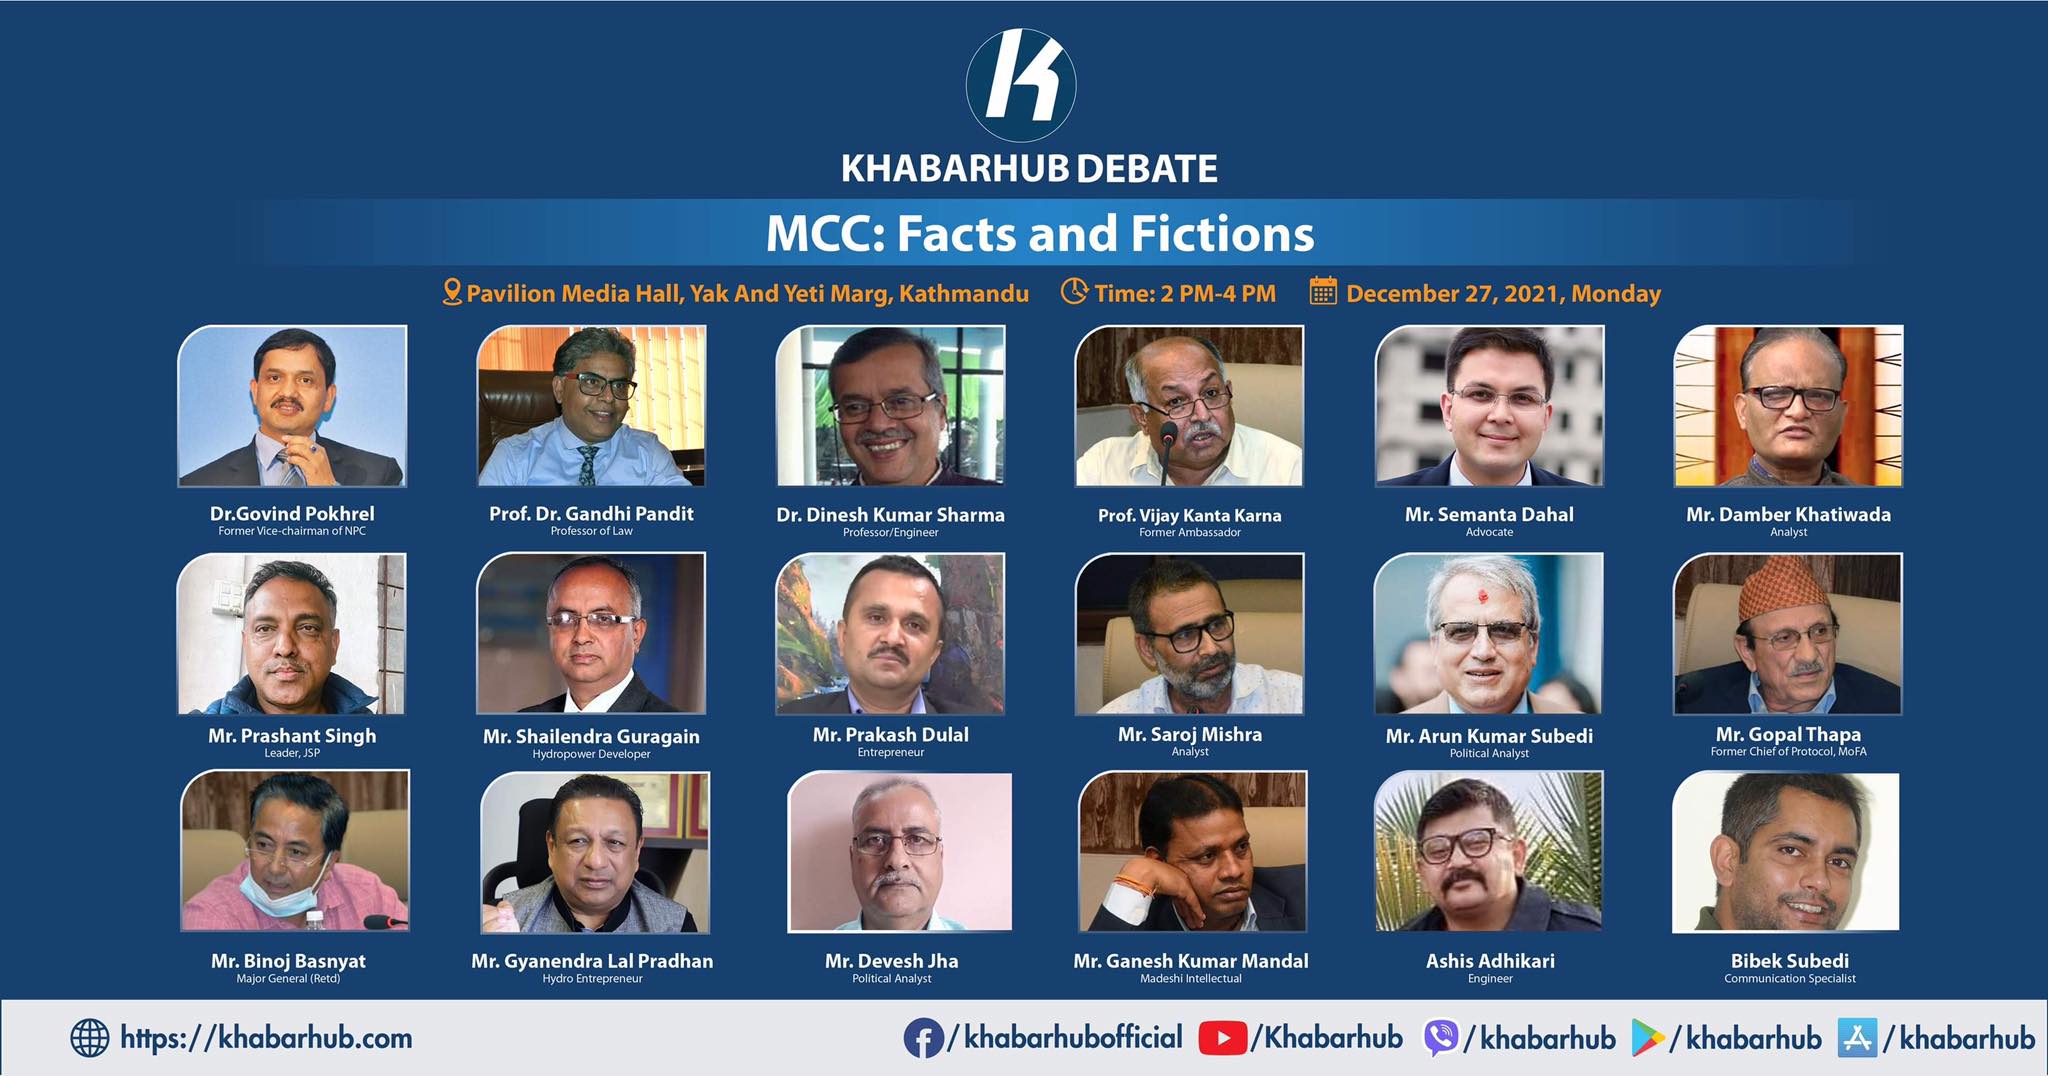 Khabarhub Debate on “MCC: Facts and Fictions” being organized today